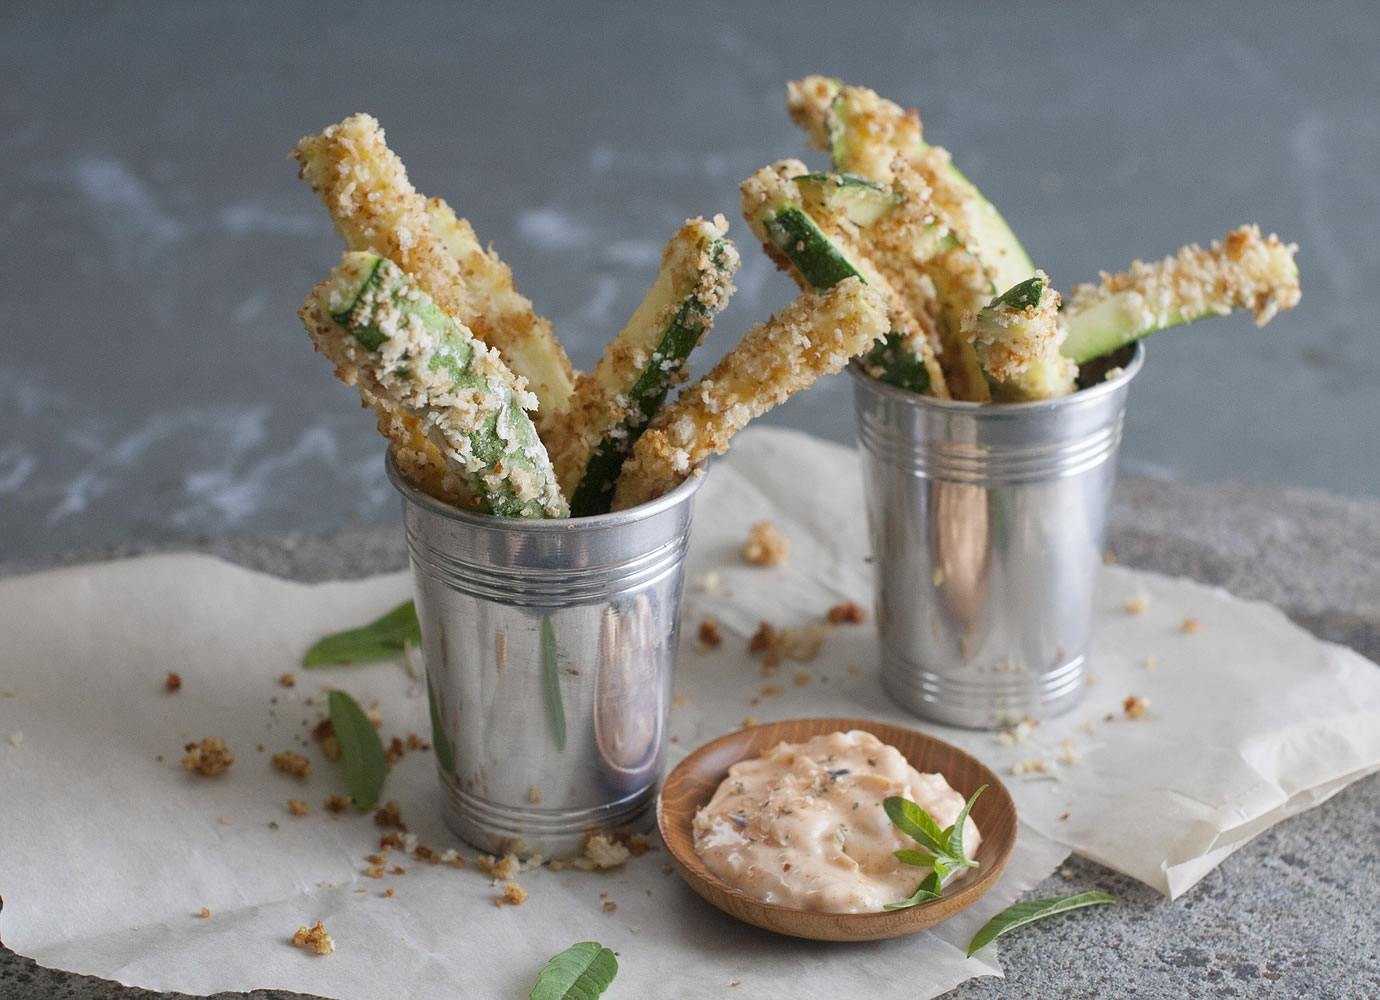 Cheesy zucchini fries with paprika dipping sauce.